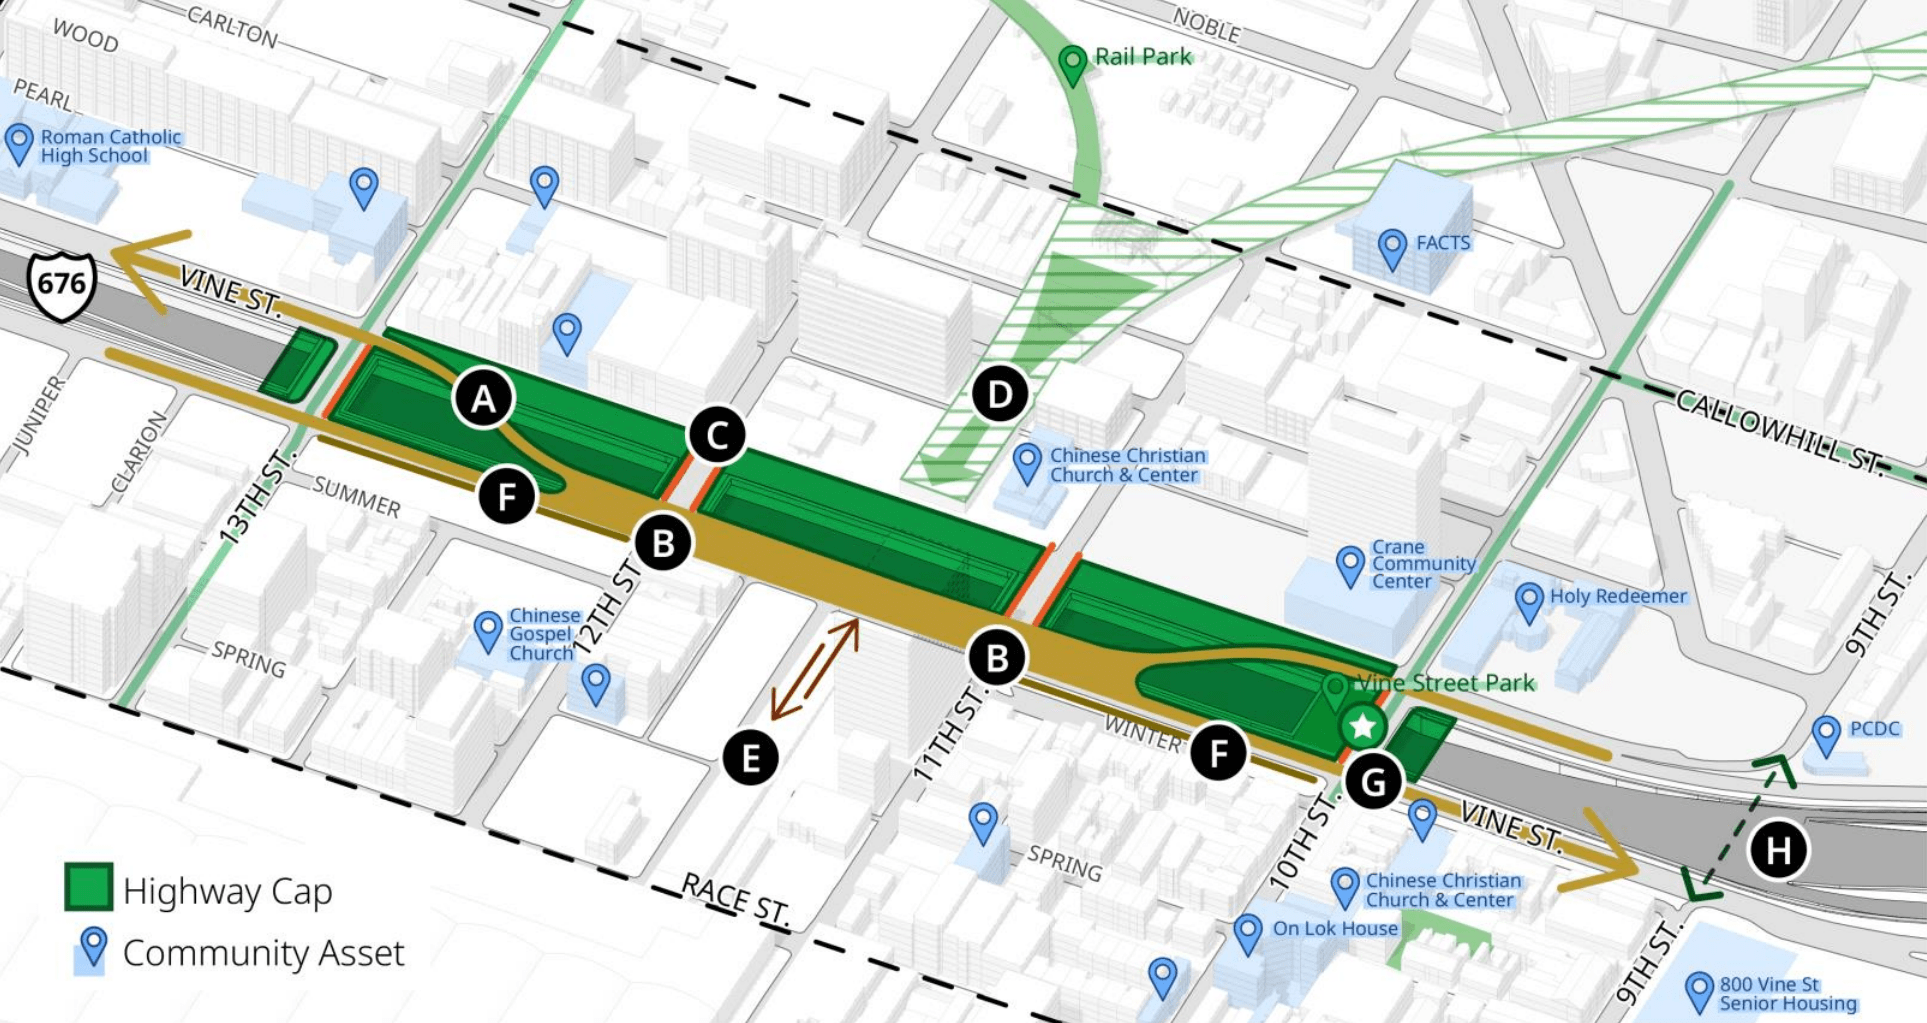 The three-block shifted local lane cap concept for Philadelphia's Chinatown includes A) a relocation of westbound Vine Street over the highway cap, B) a shorter crossing distance here, C) active spaces along north-south cross streets, D) a potential rail park connection, E) ramp access here to the Convention Center, F) removed sound barrier wall for wider sidewalks, G) an improved key intersection and H) an exploration into improved pedestrian connection.